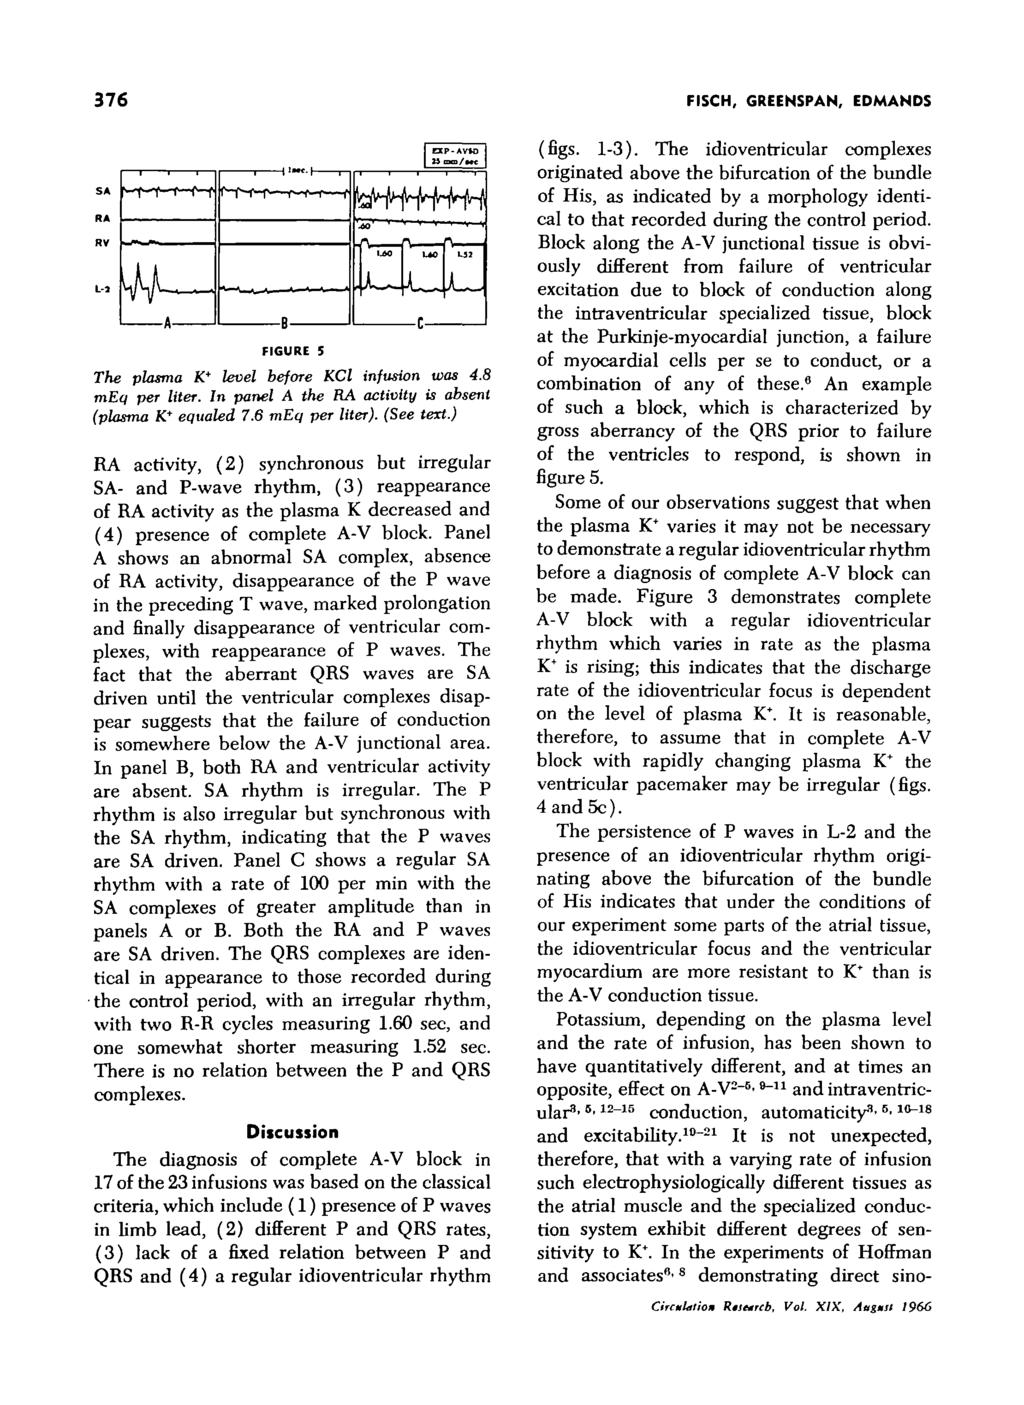 376 FISCH, GREENSPAN, EDMANDS FIGURE 5 The plasma K* level before KCl infusion was 4.8 meq per liter. In panel A the RA activity is absent (plasma K* equaled 7.6 meq per liter). (See text.